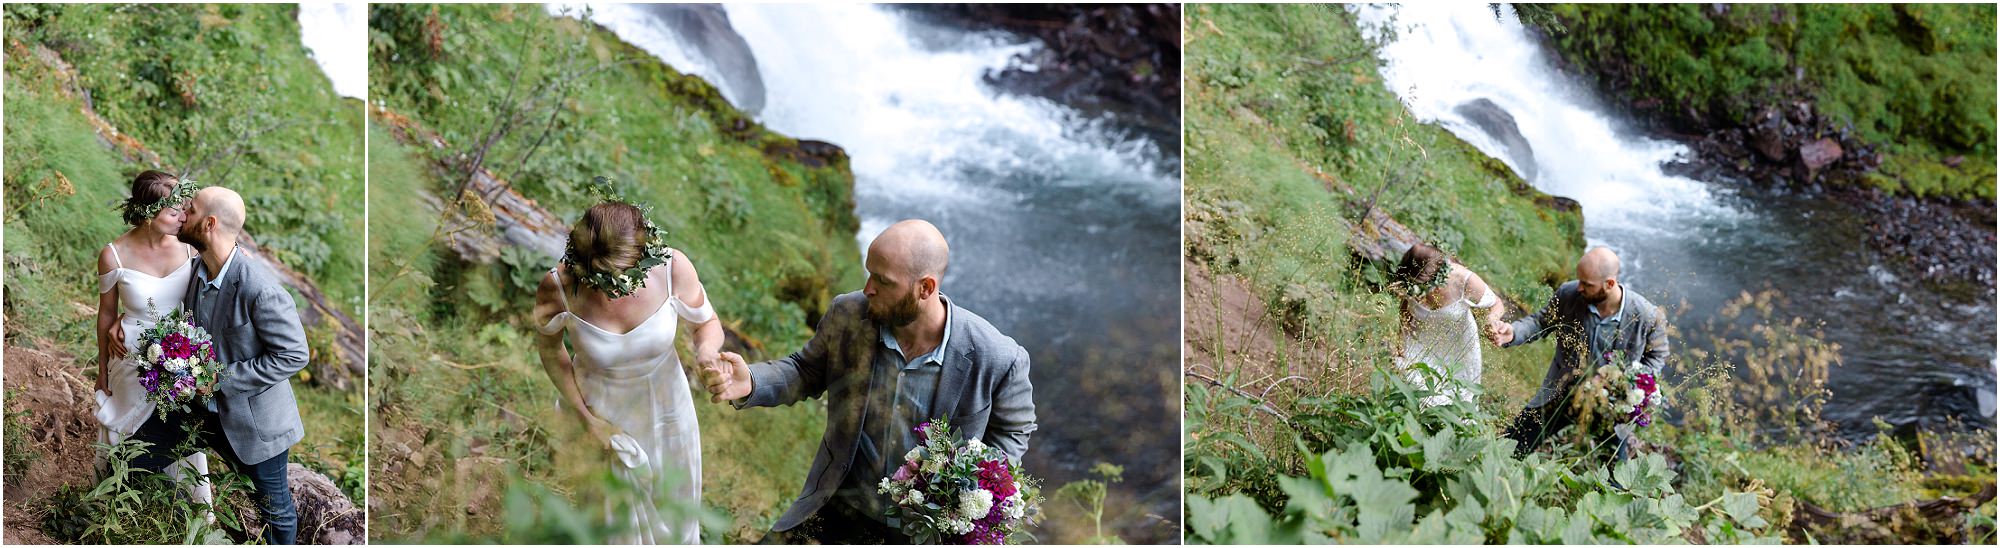 A bride and groom stand in the lush green vegetation at the base of a waterfall as Bend Oregon elopement photographer Erica Swantek Photography documents their day. 